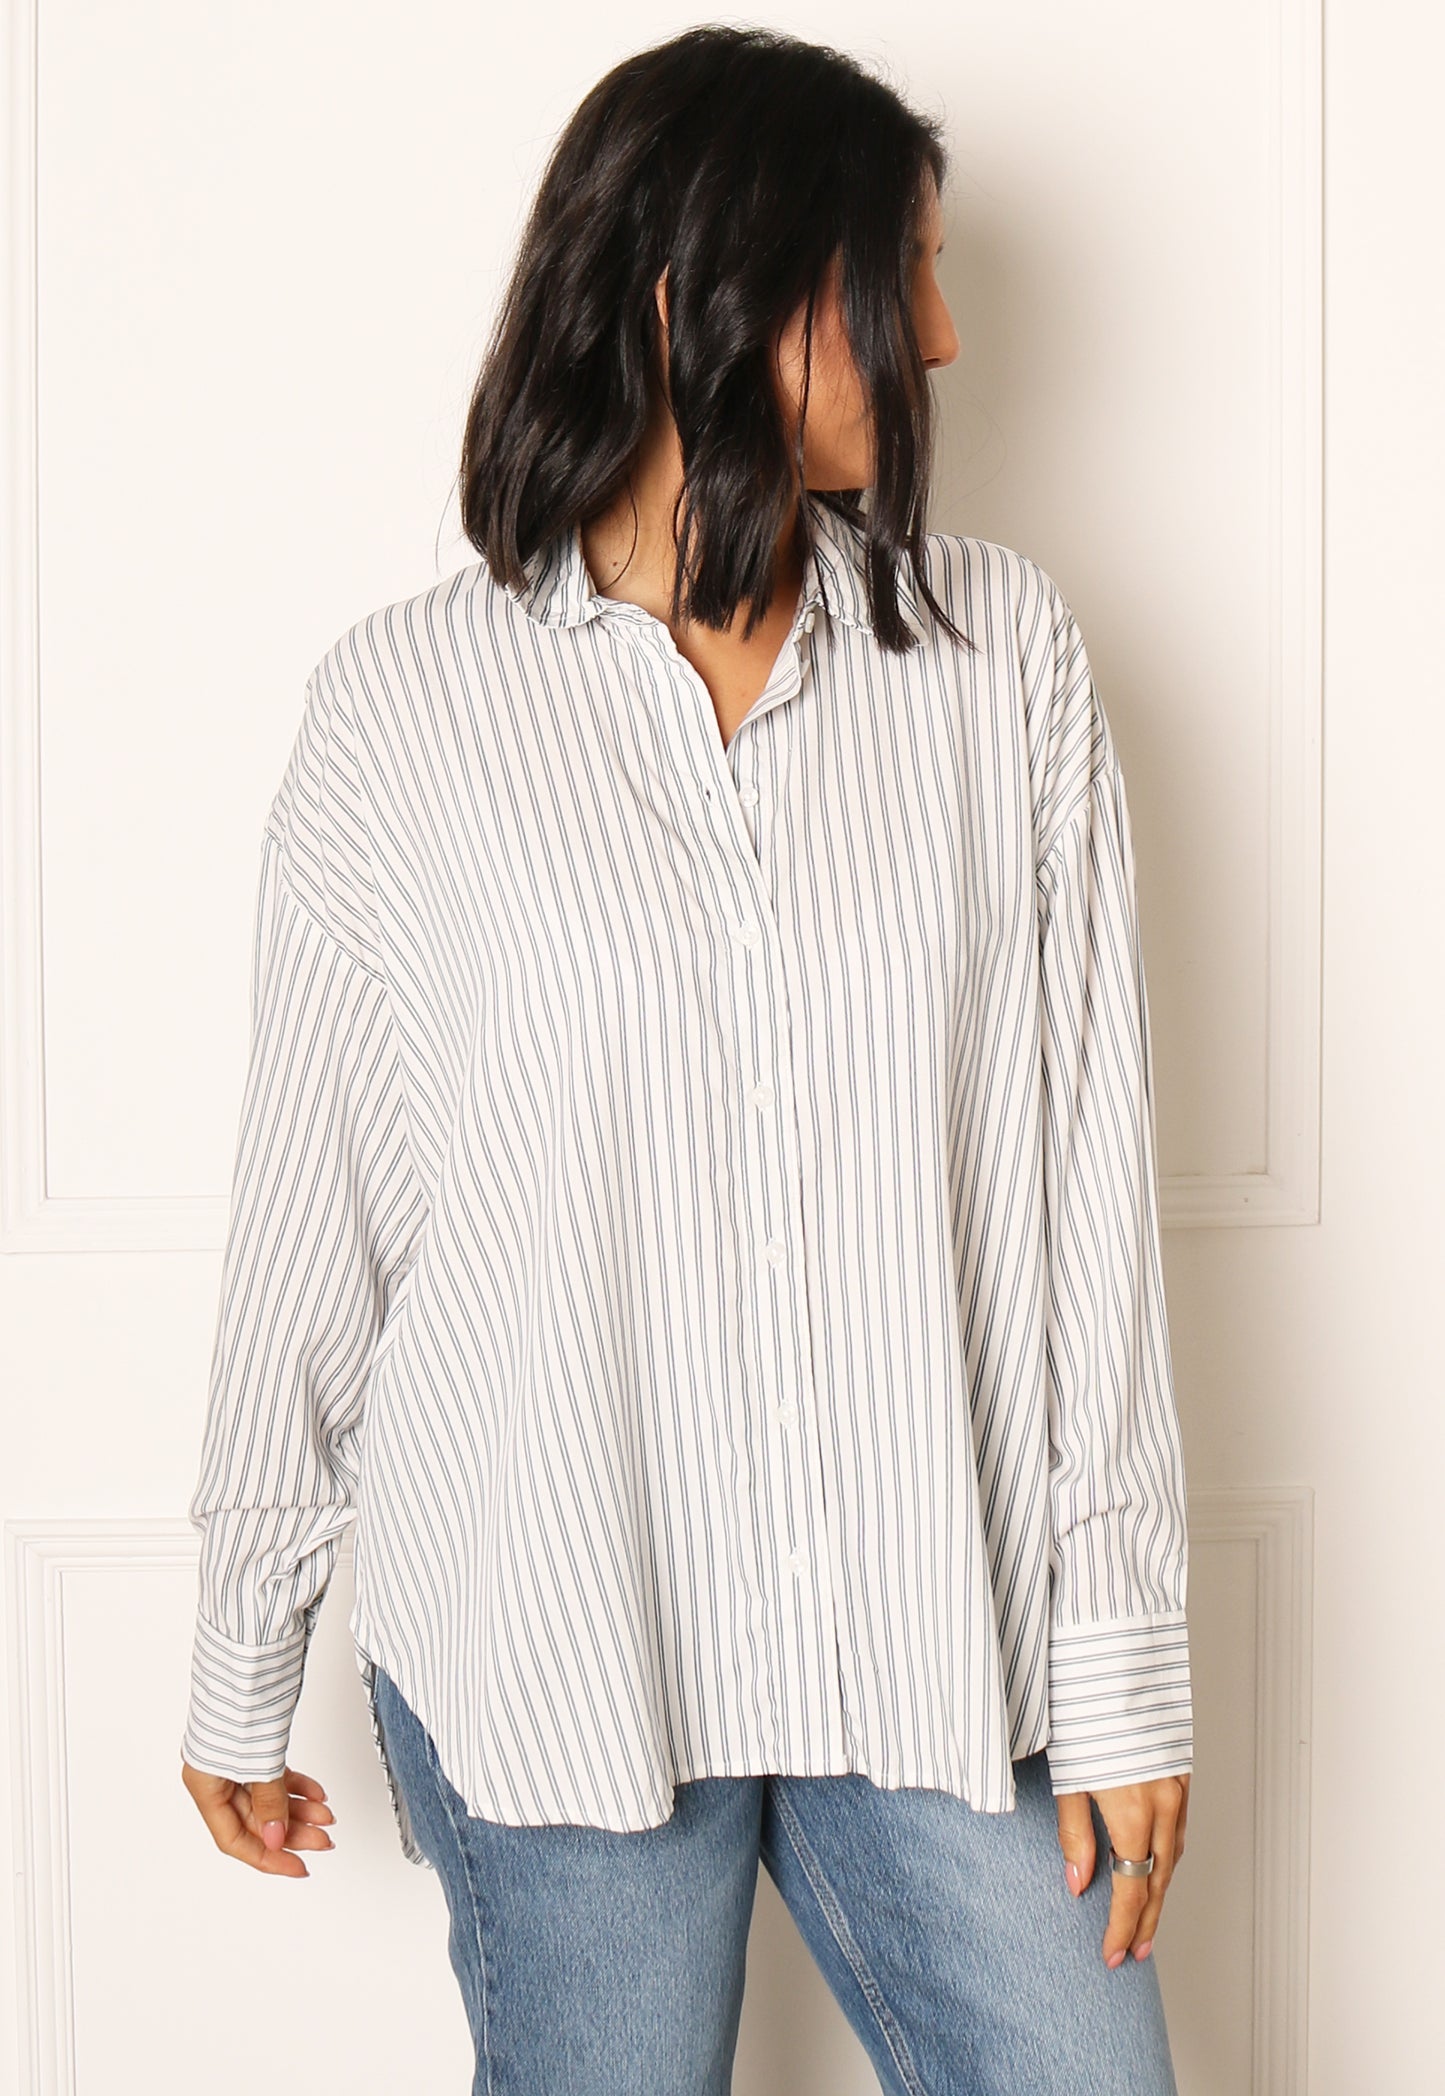 JDY Grace Stripe Longline Long Sleeve Cotton Shirt with Dip Hem in White & Navy - One Nation Clothing